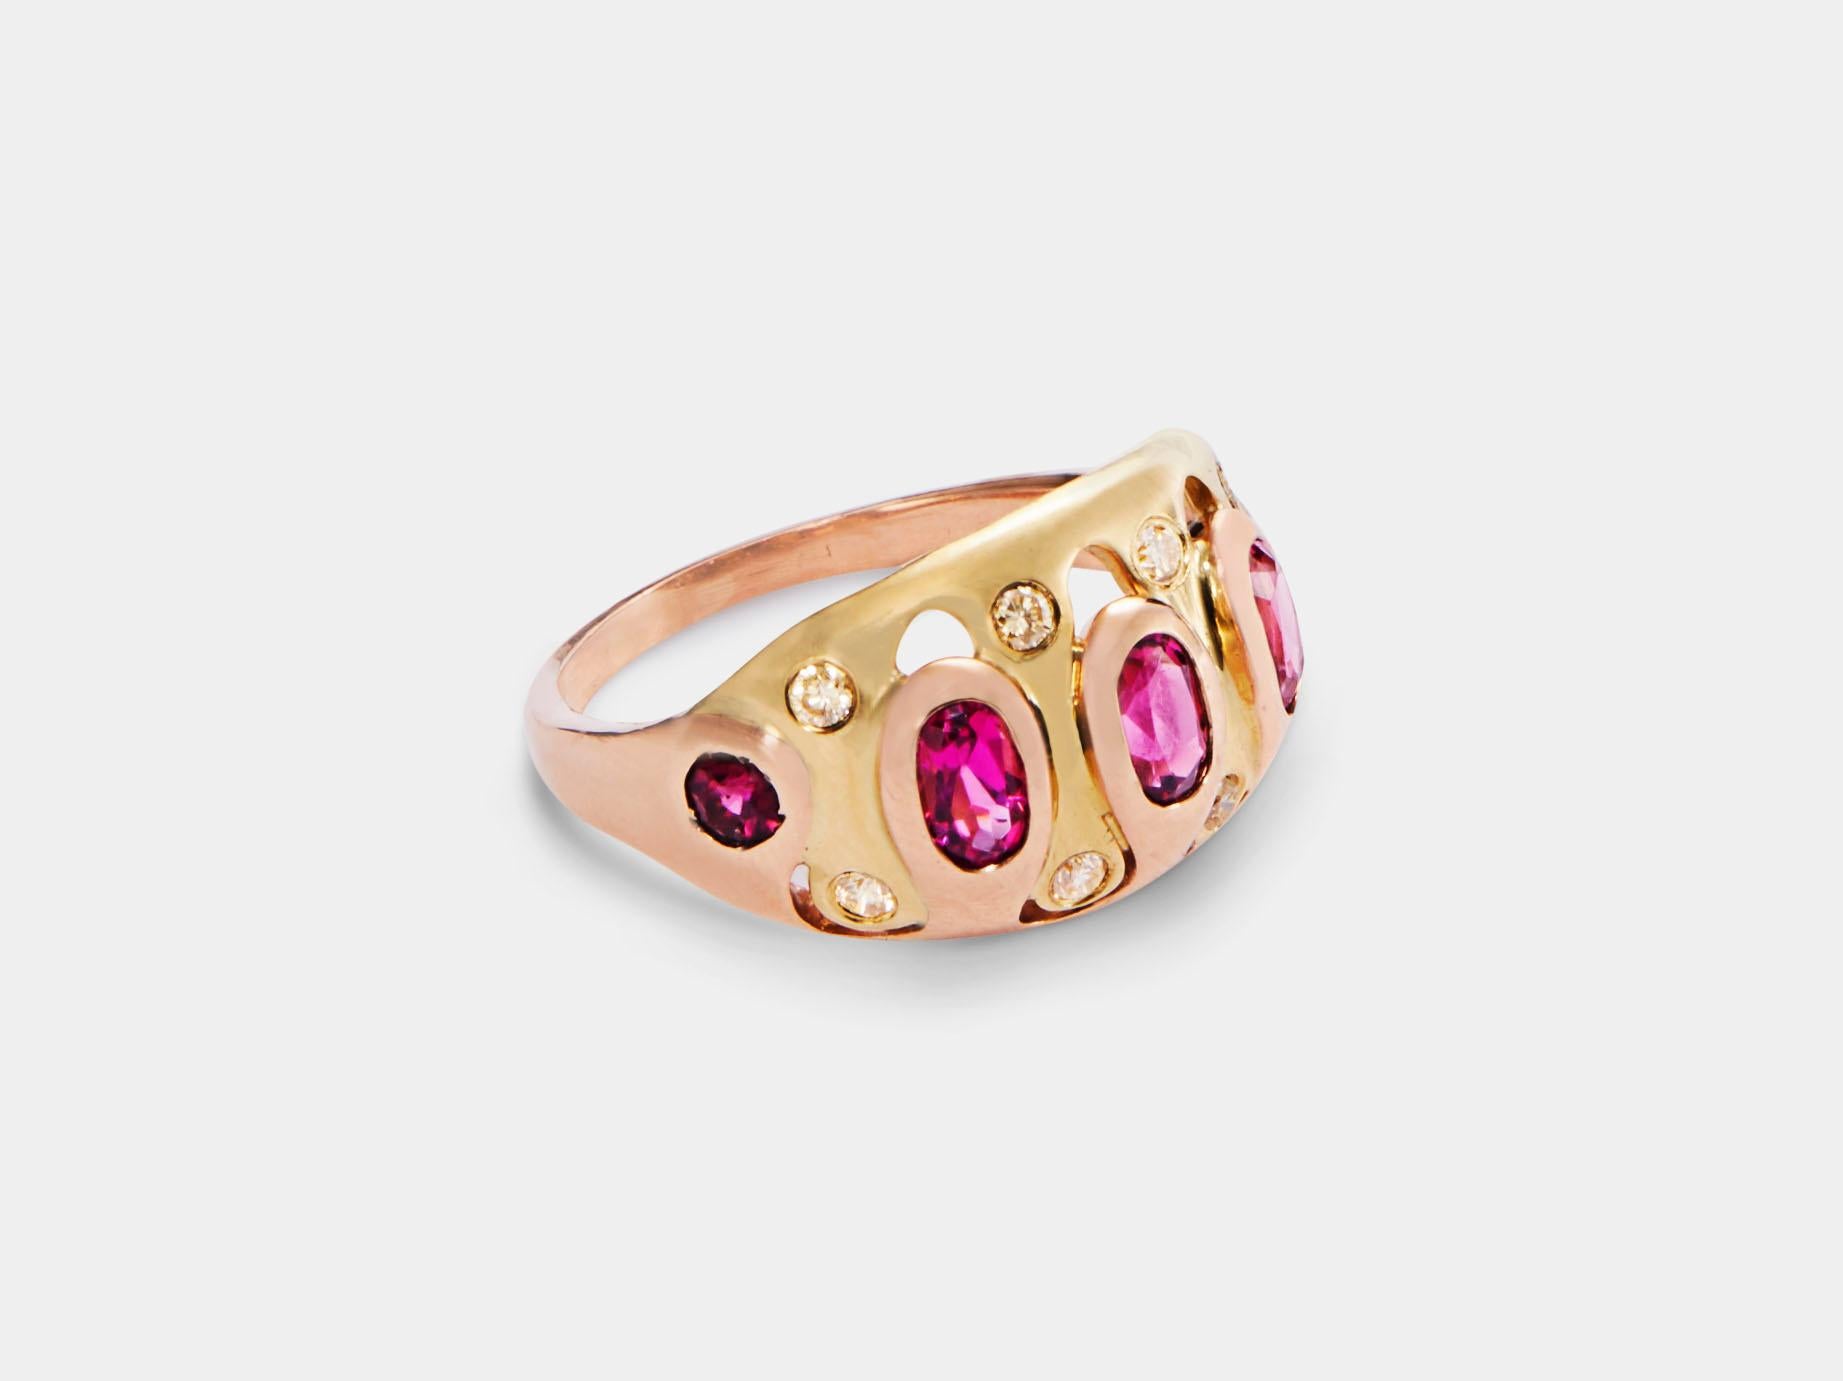 Jigsaw Ring with Rubellite Tourmaline from modern fine jewelry house, Baker & Black. A mix of metals and gems, this cocktail ring is just crazy enough to work.  

• rubellite tourmaline
• yellow diamonds, weighing .24cttw
• measures 12mm (½